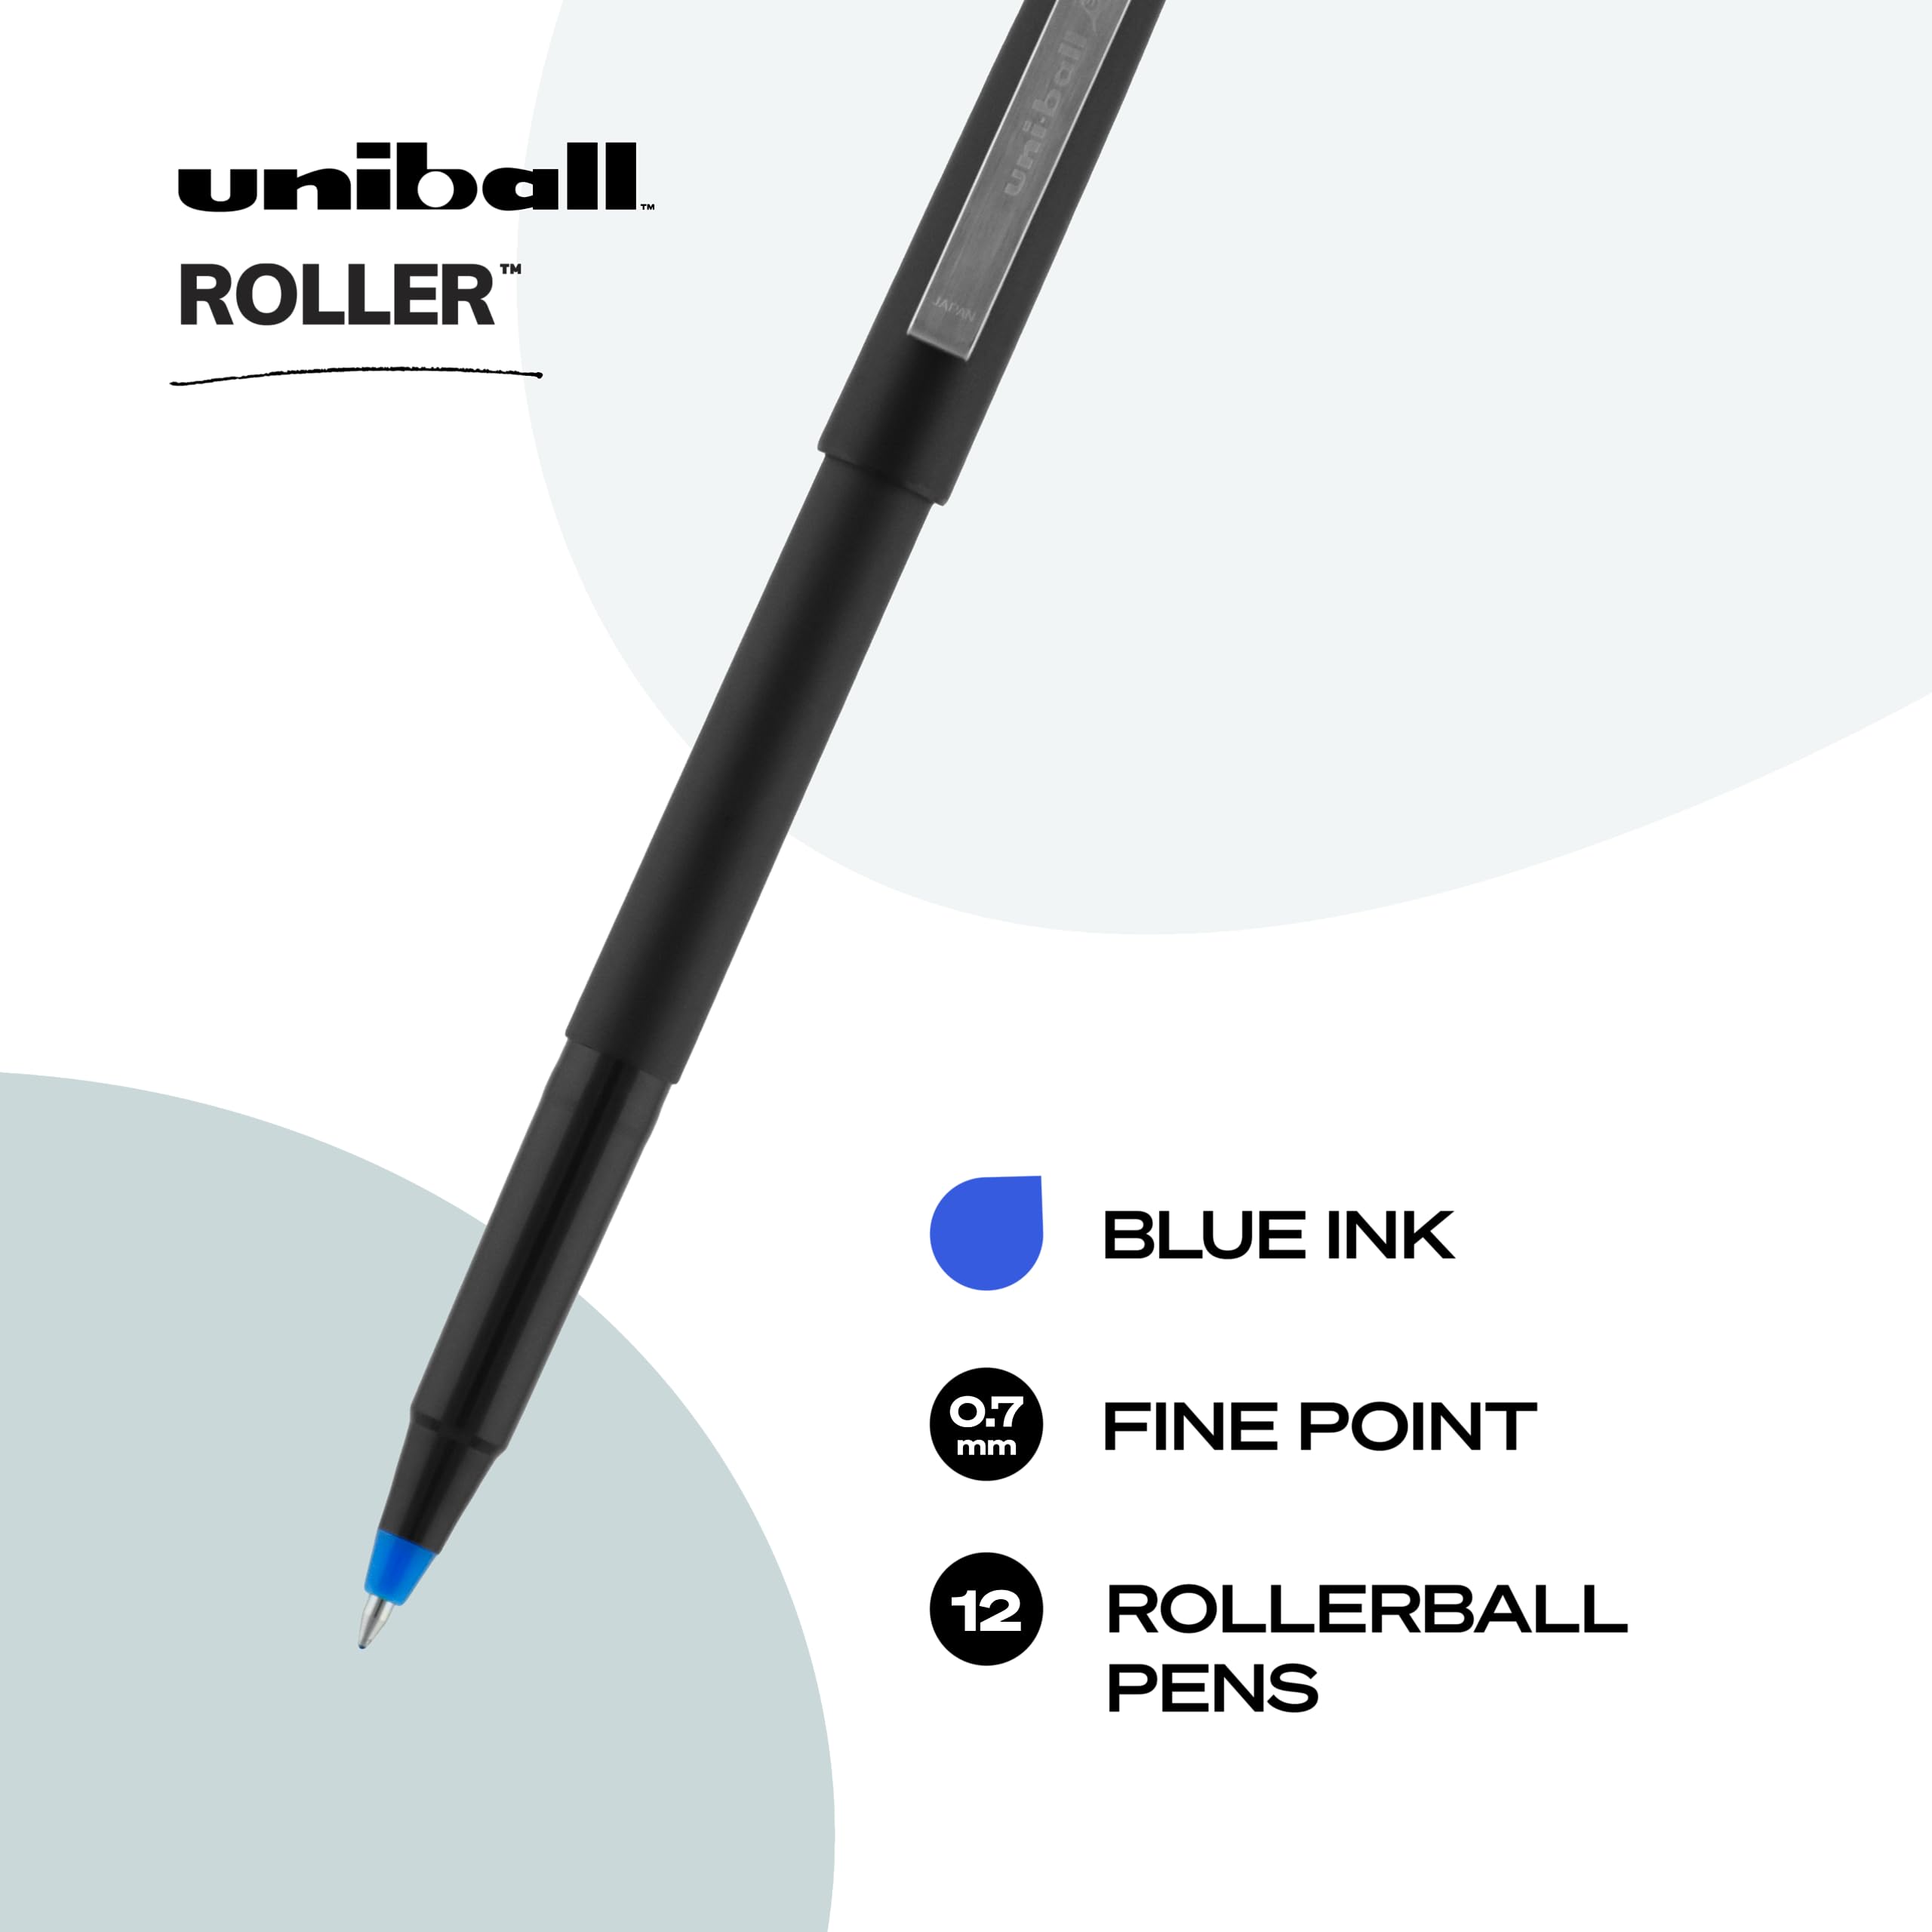 0.7mm Rollerball Fine Point Pen, 12 Pack Blue Colored Pens, Pens Fine Point, Smooth Writing, Pens Bulk for Office Supplies, Uniball Sells Gel Pens, Ballpoint Pens, Ink Pens, Black Pens, and Red Pens